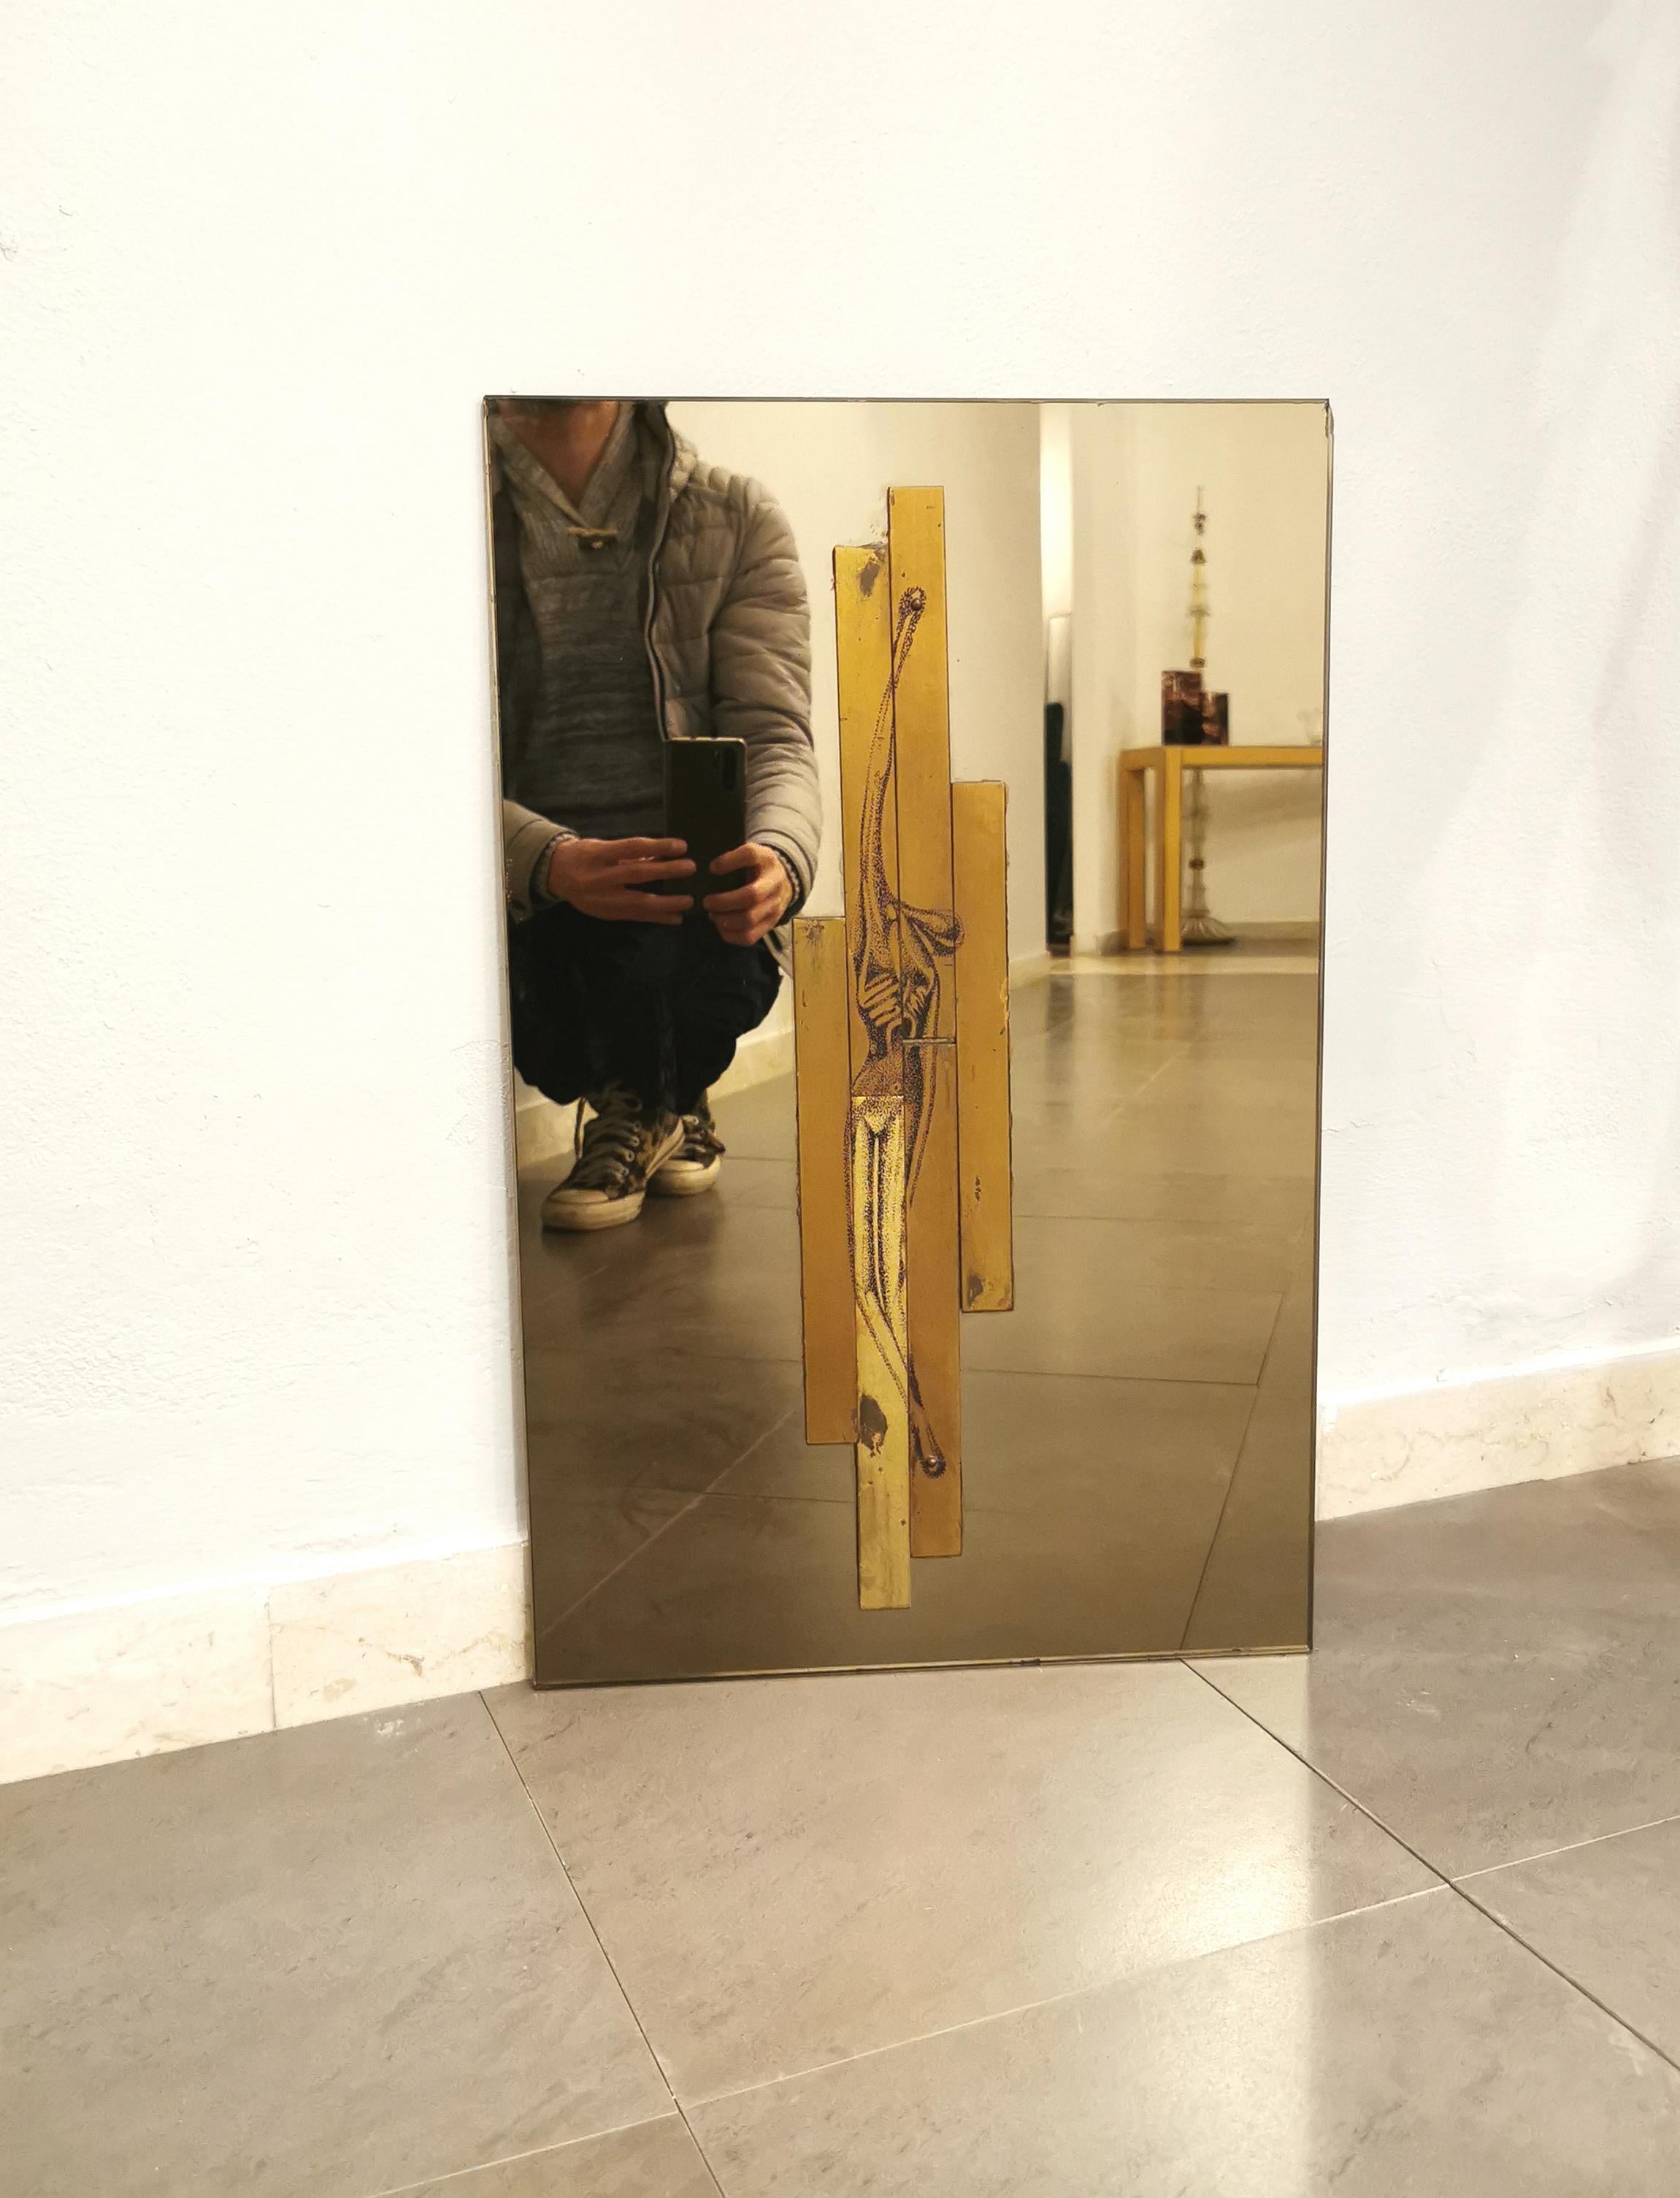 Particular and unique rectangular shaped wall sculpture by the unknown designer in caramel-colored mirrored glass with brass plates screwed to the center of the mirror, where the drawing of a human body is depicted. Made in Italy in the 70s.